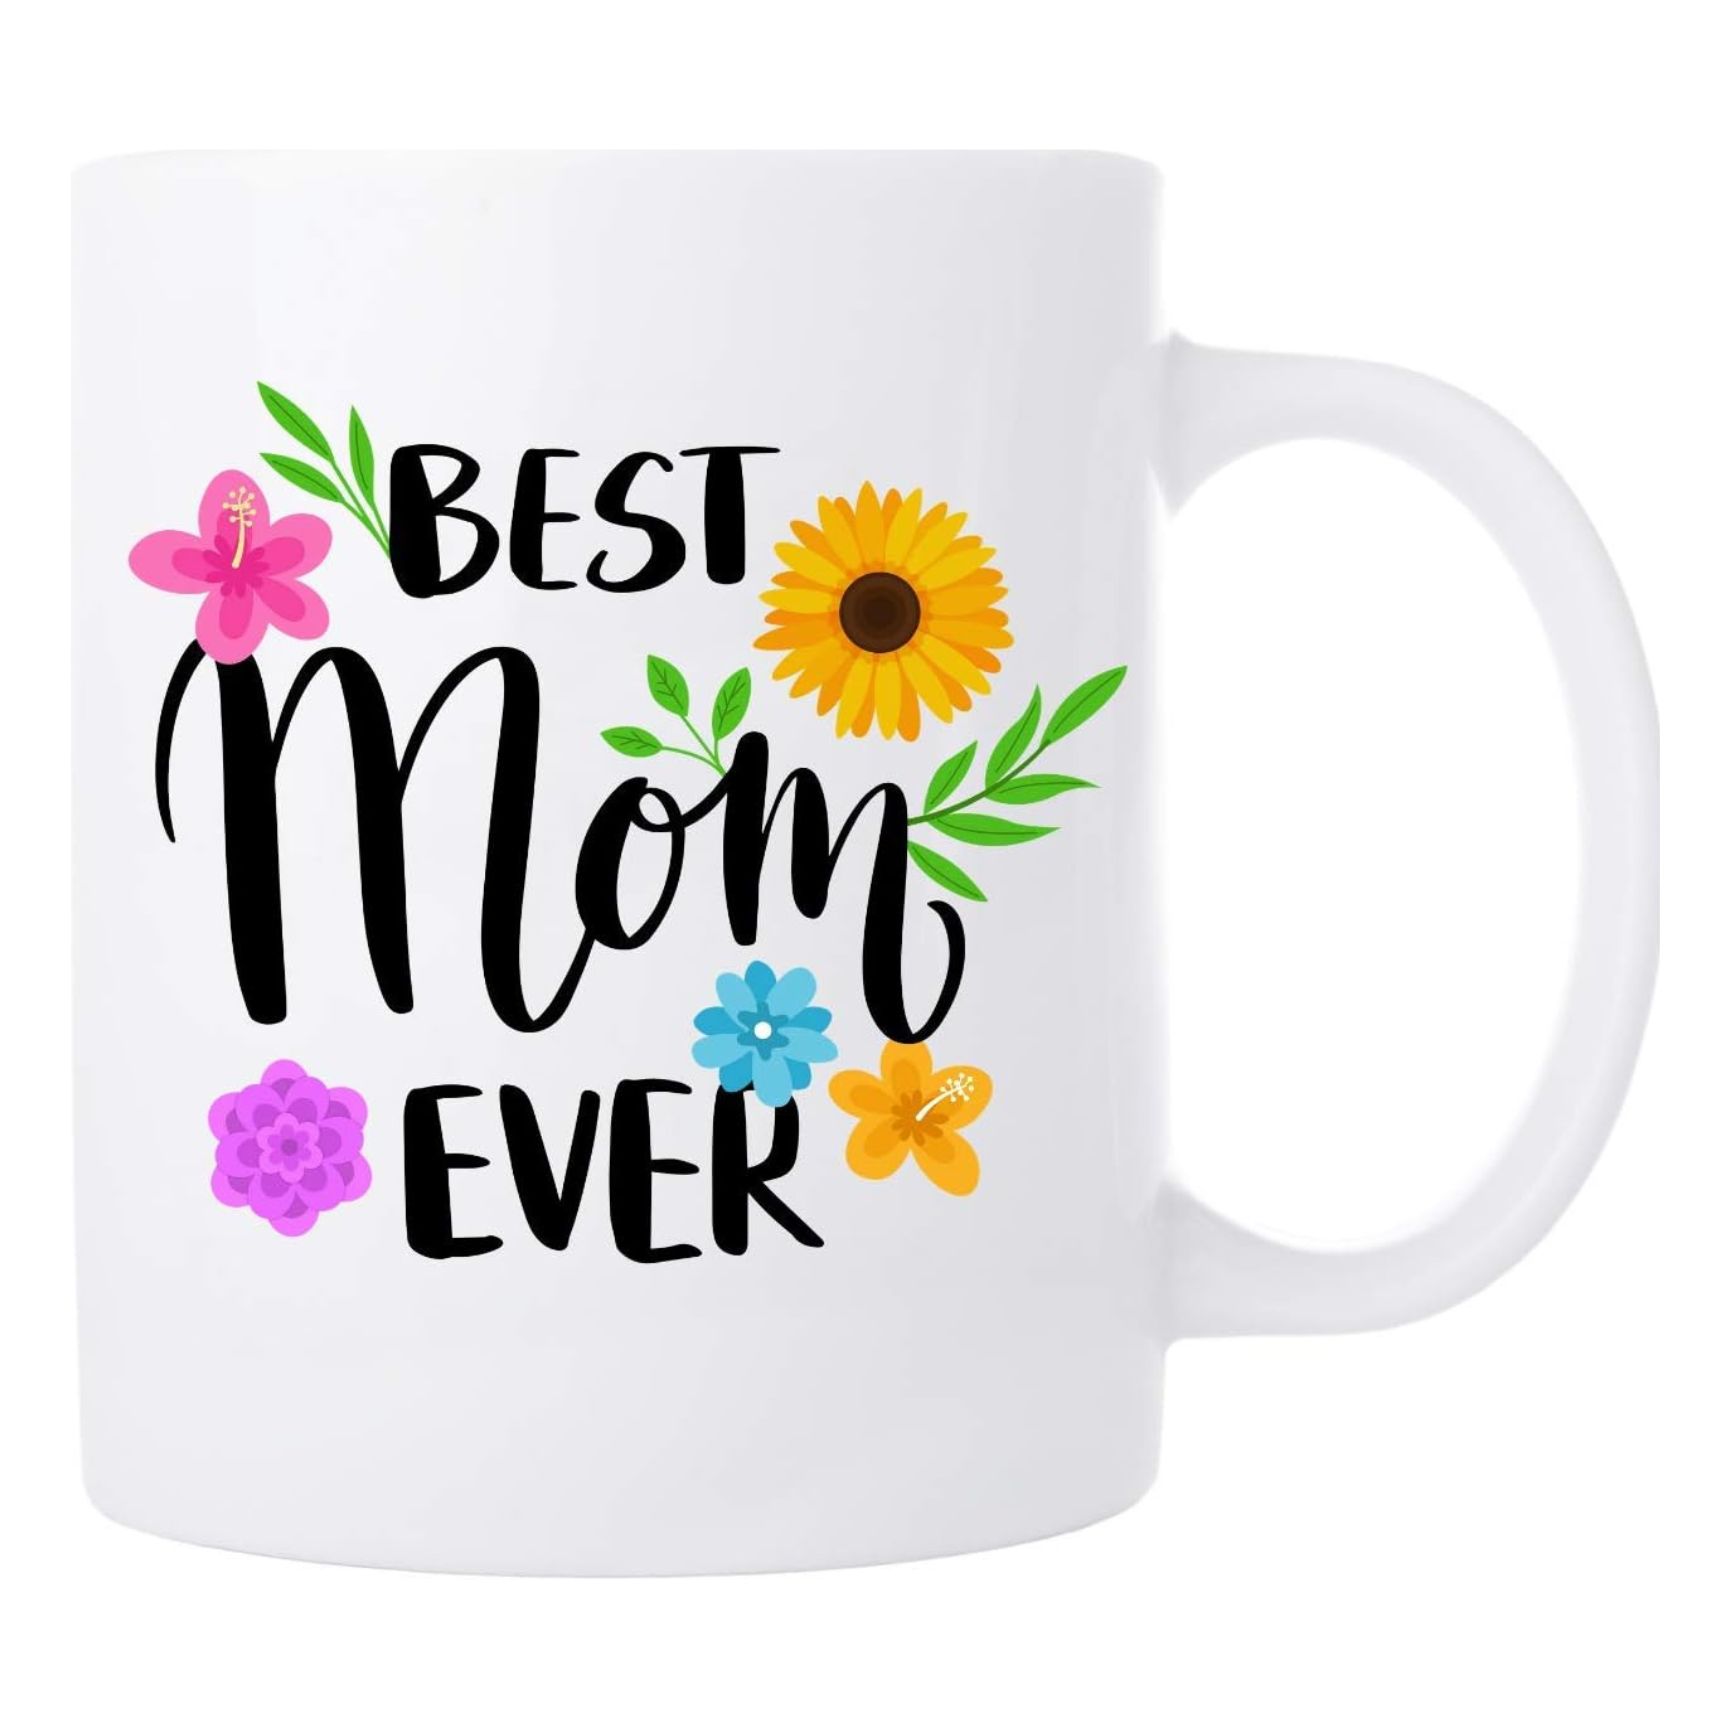 best mom ever cup 1